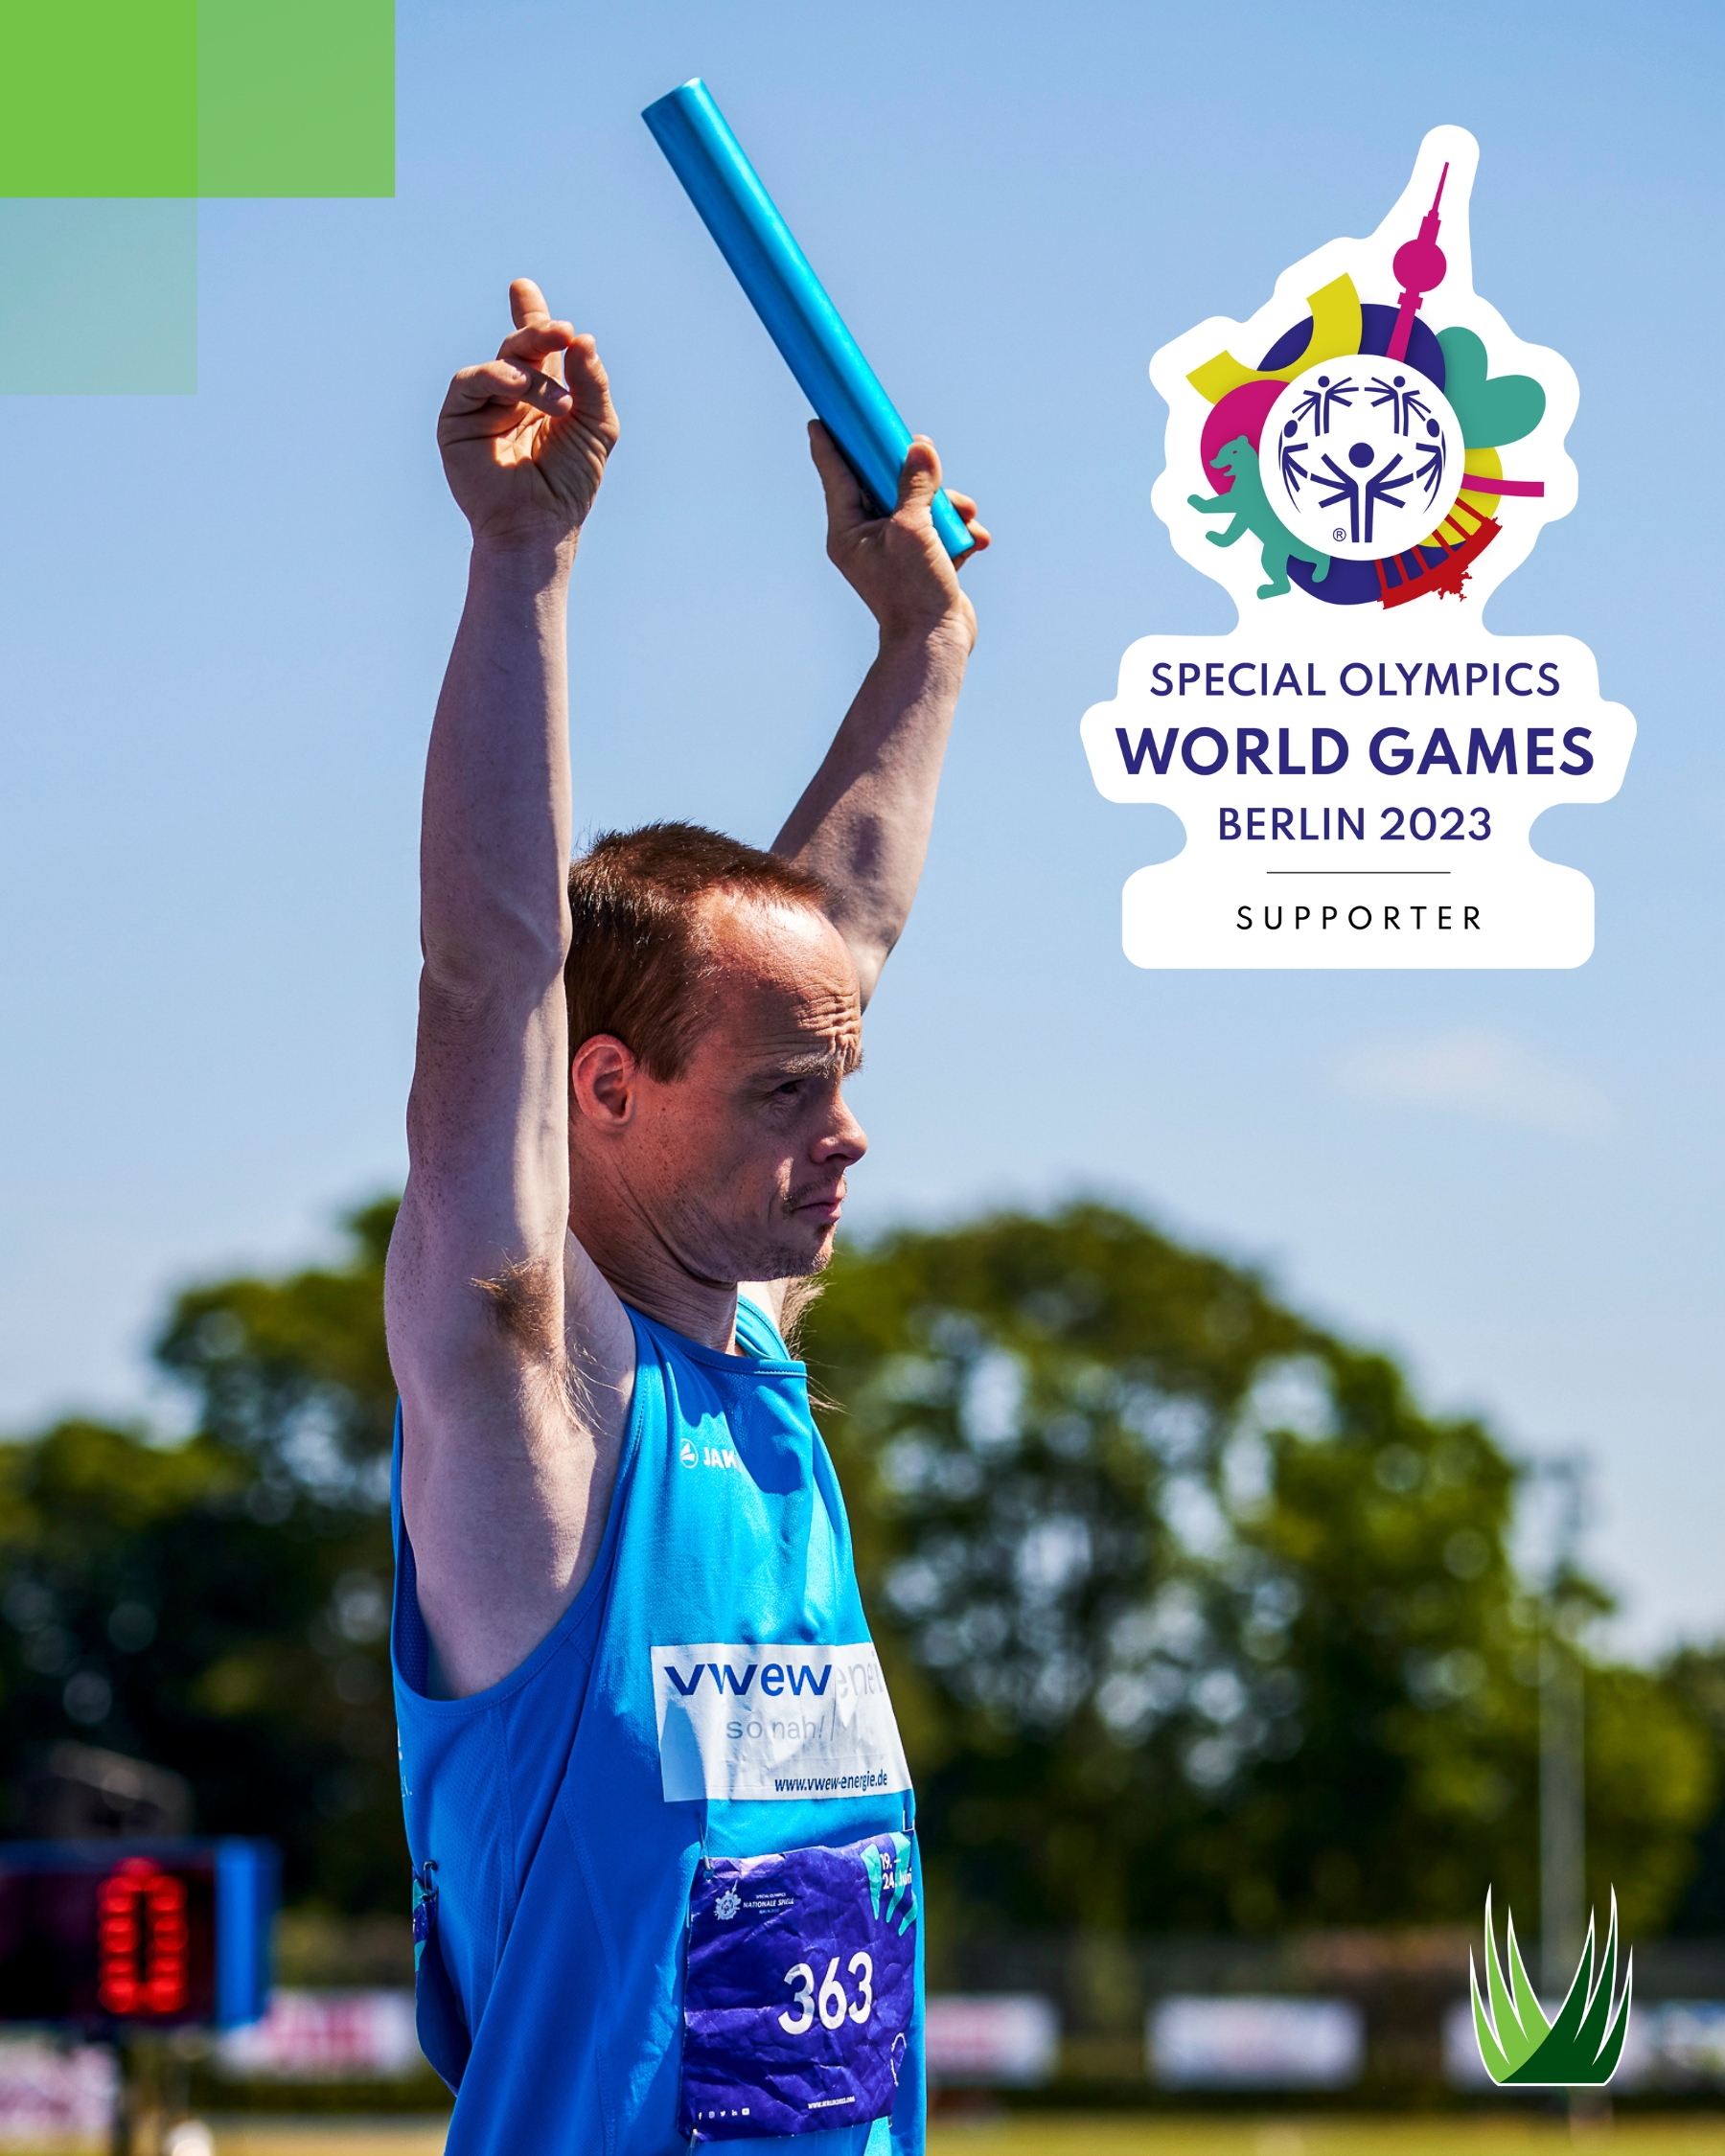 SYNLawn Announces Sponsorship of the 2023 Special Olympics World Games